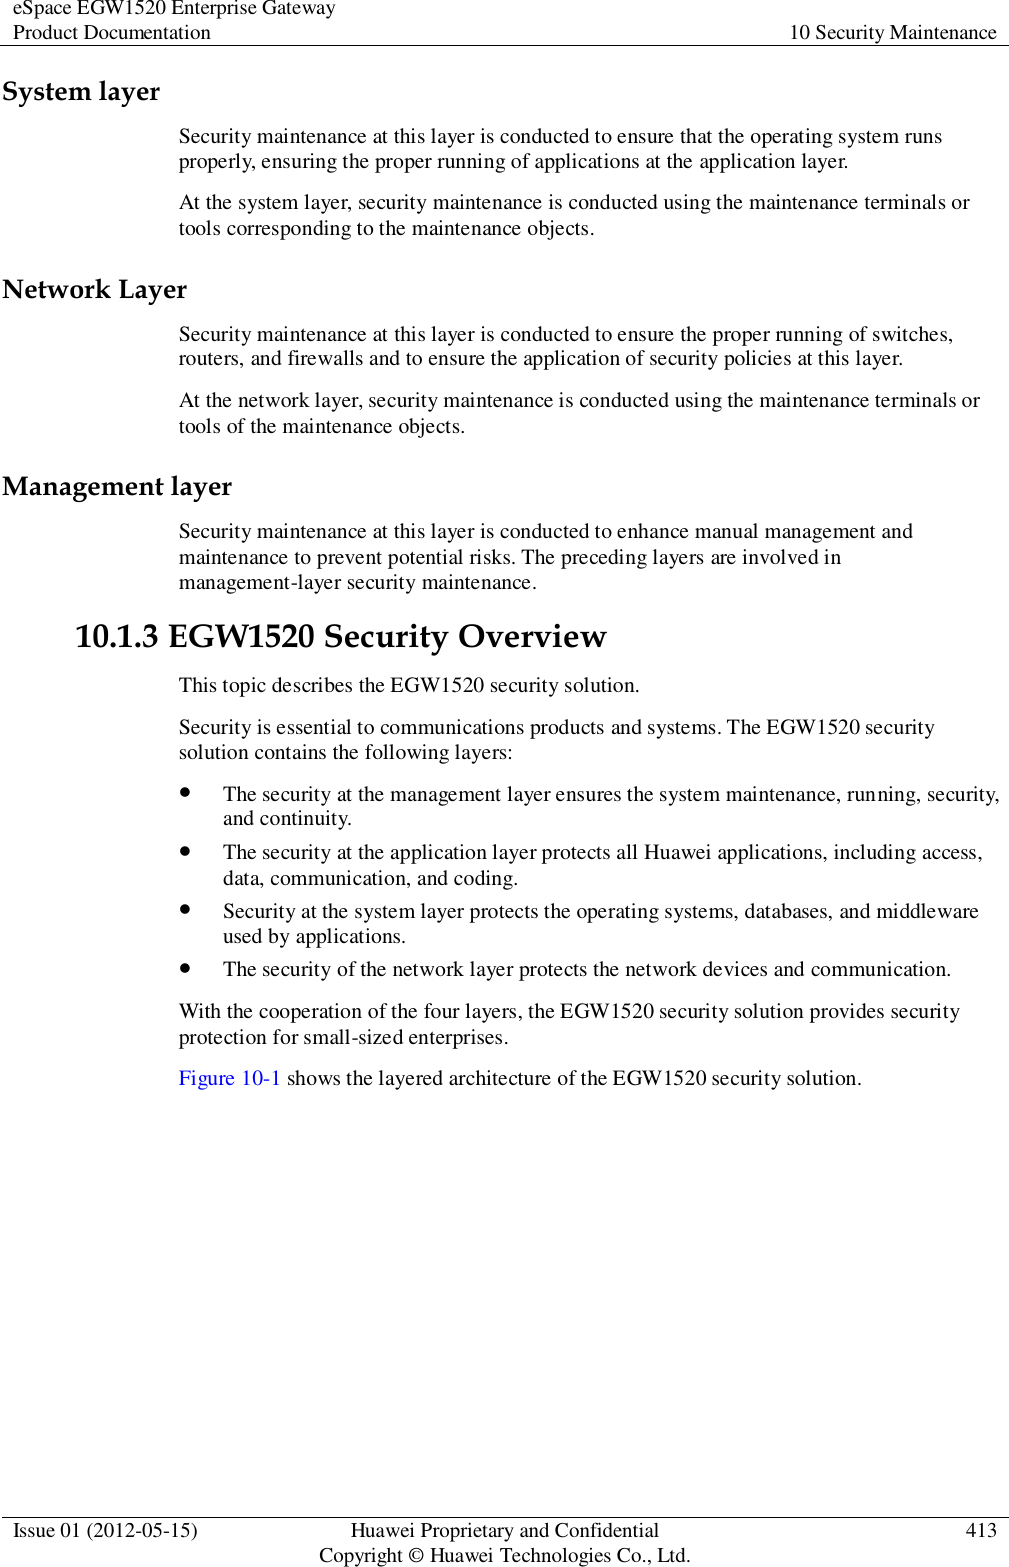 eSpace EGW1520 Enterprise Gateway Product Documentation 10 Security Maintenance  Issue 01 (2012-05-15) Huawei Proprietary and Confidential                                     Copyright © Huawei Technologies Co., Ltd. 413  System layer Security maintenance at this layer is conducted to ensure that the operating system runs properly, ensuring the proper running of applications at the application layer. At the system layer, security maintenance is conducted using the maintenance terminals or tools corresponding to the maintenance objects. Network Layer Security maintenance at this layer is conducted to ensure the proper running of switches, routers, and firewalls and to ensure the application of security policies at this layer. At the network layer, security maintenance is conducted using the maintenance terminals or tools of the maintenance objects. Management layer Security maintenance at this layer is conducted to enhance manual management and maintenance to prevent potential risks. The preceding layers are involved in management-layer security maintenance. 10.1.3 EGW1520 Security Overview This topic describes the EGW1520 security solution. Security is essential to communications products and systems. The EGW1520 security solution contains the following layers:  The security at the management layer ensures the system maintenance, running, security, and continuity.  The security at the application layer protects all Huawei applications, including access, data, communication, and coding.  Security at the system layer protects the operating systems, databases, and middleware used by applications.  The security of the network layer protects the network devices and communication. With the cooperation of the four layers, the EGW1520 security solution provides security protection for small-sized enterprises. Figure 10-1 shows the layered architecture of the EGW1520 security solution. 